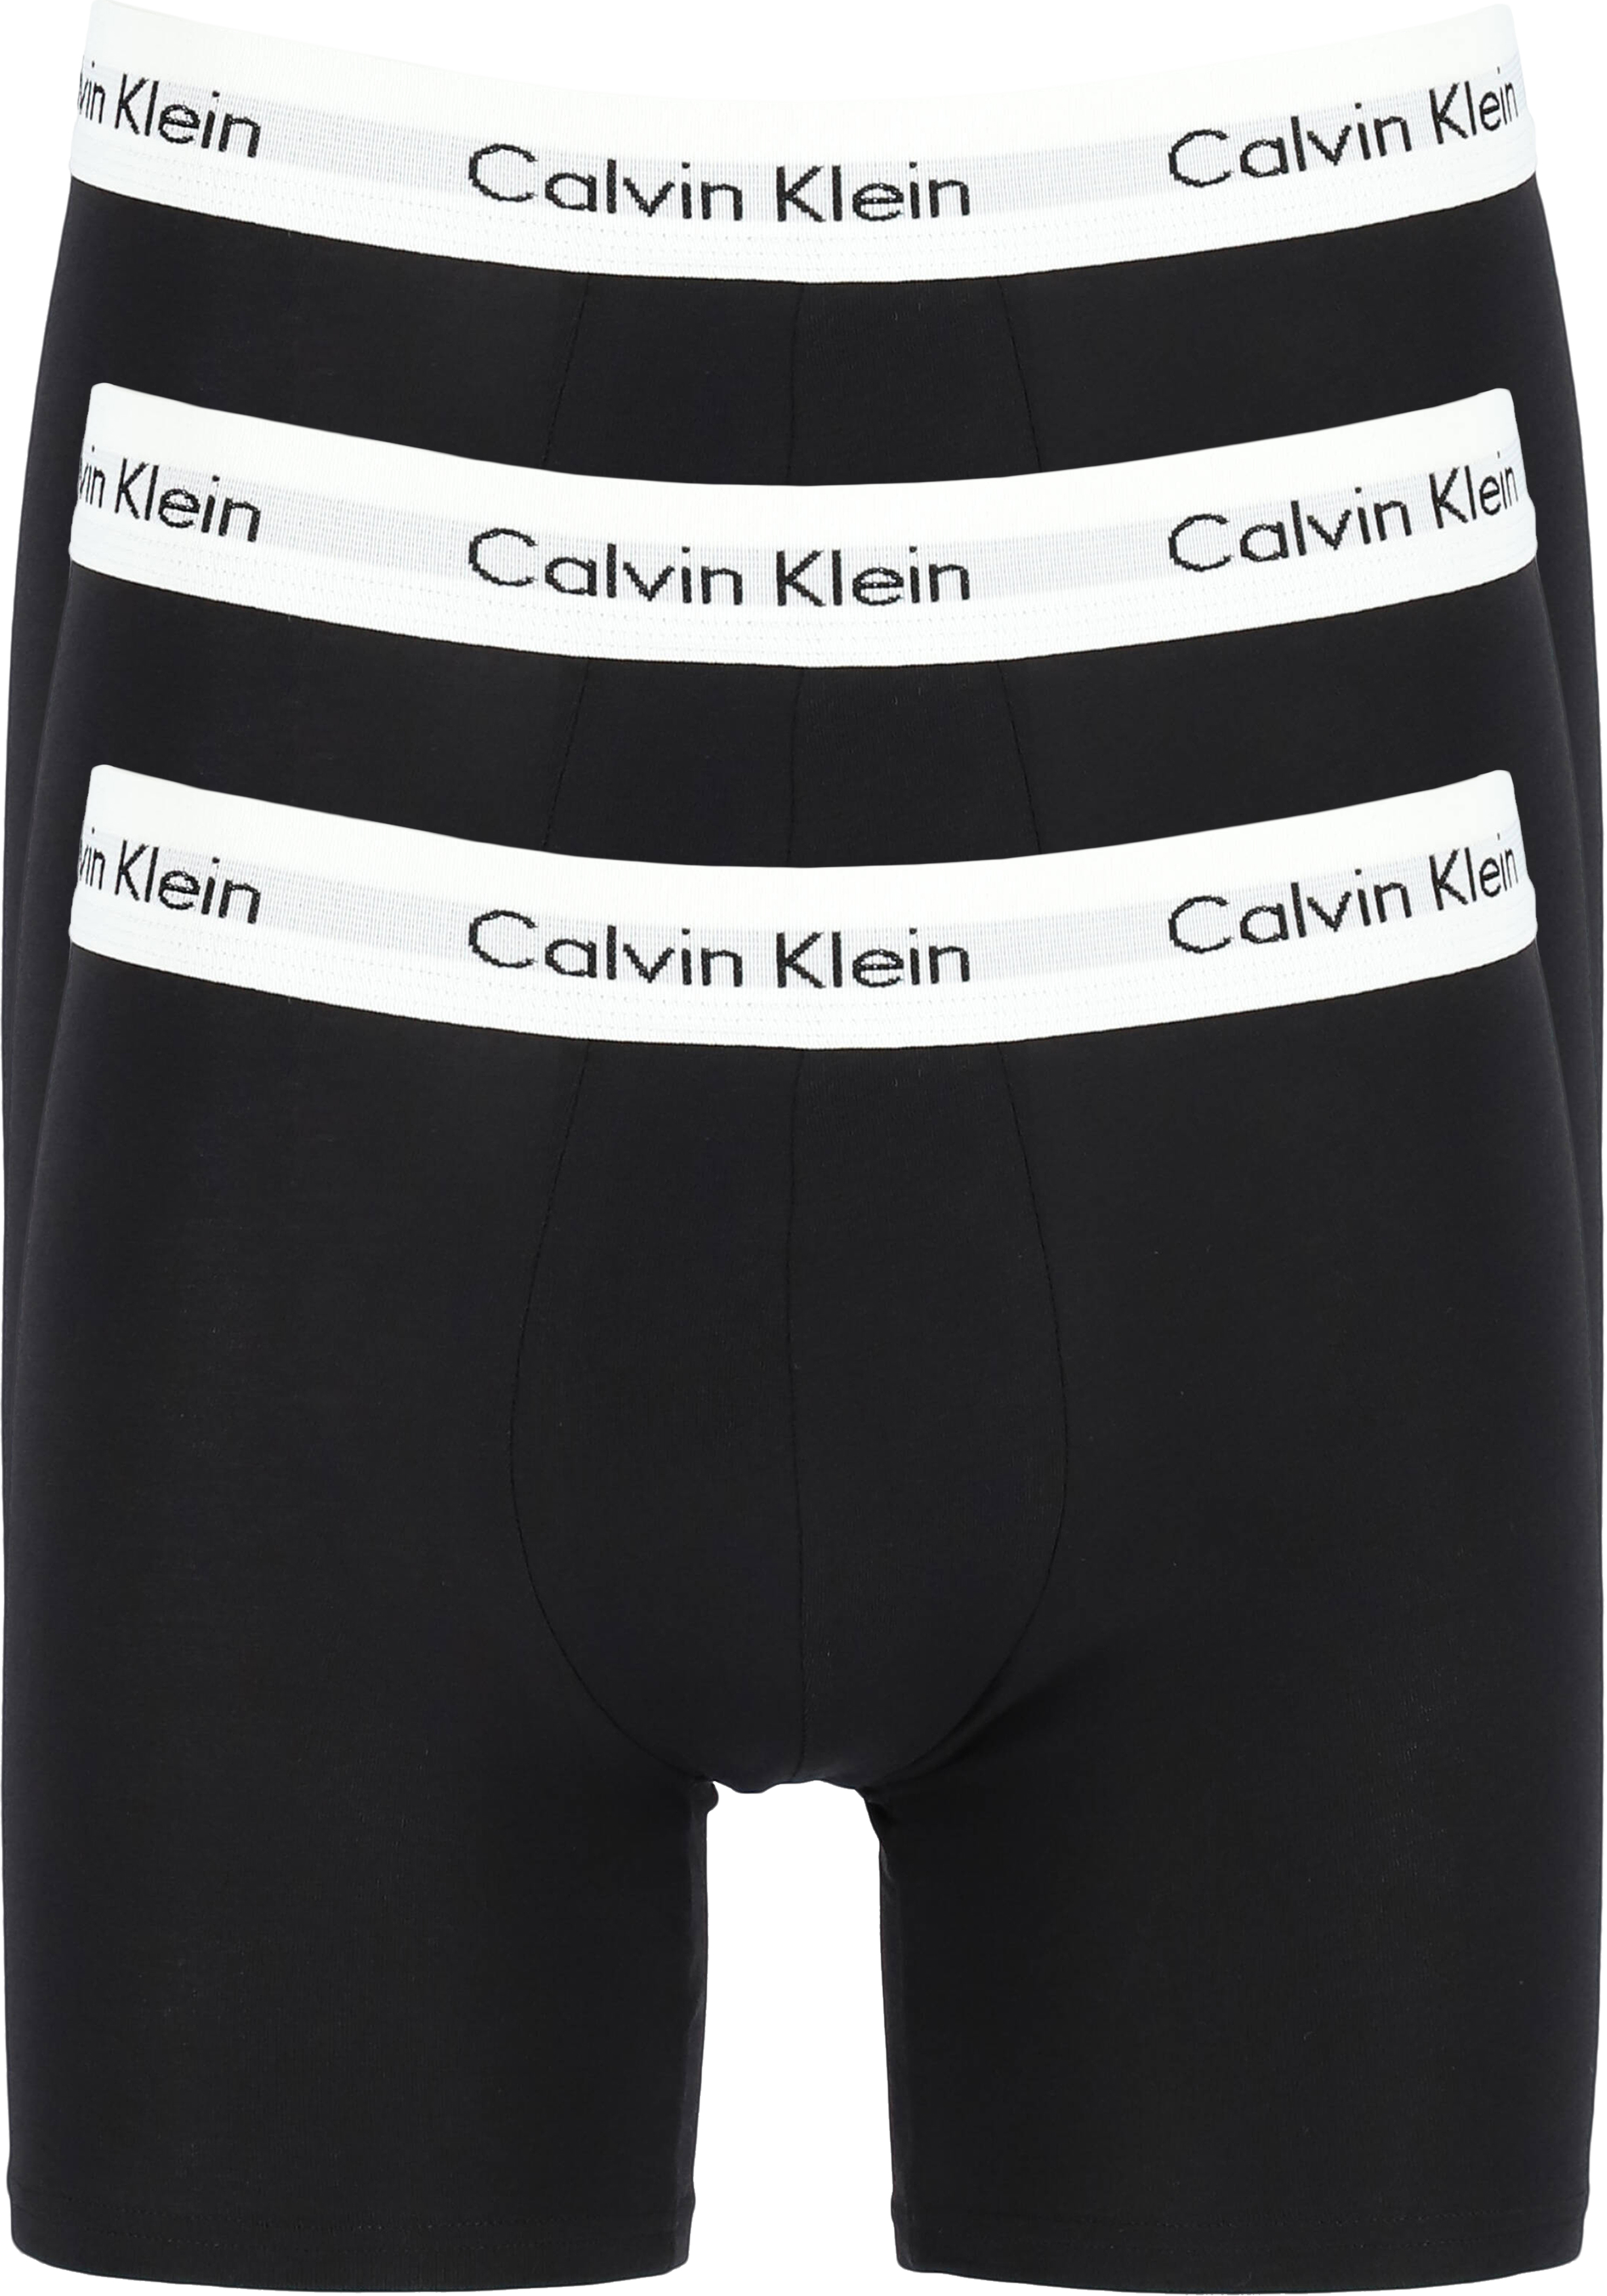 Calvin Klein Cotton boxer brief (3-pack), heren boxers extra... - Zomer SALE tot 50% korting